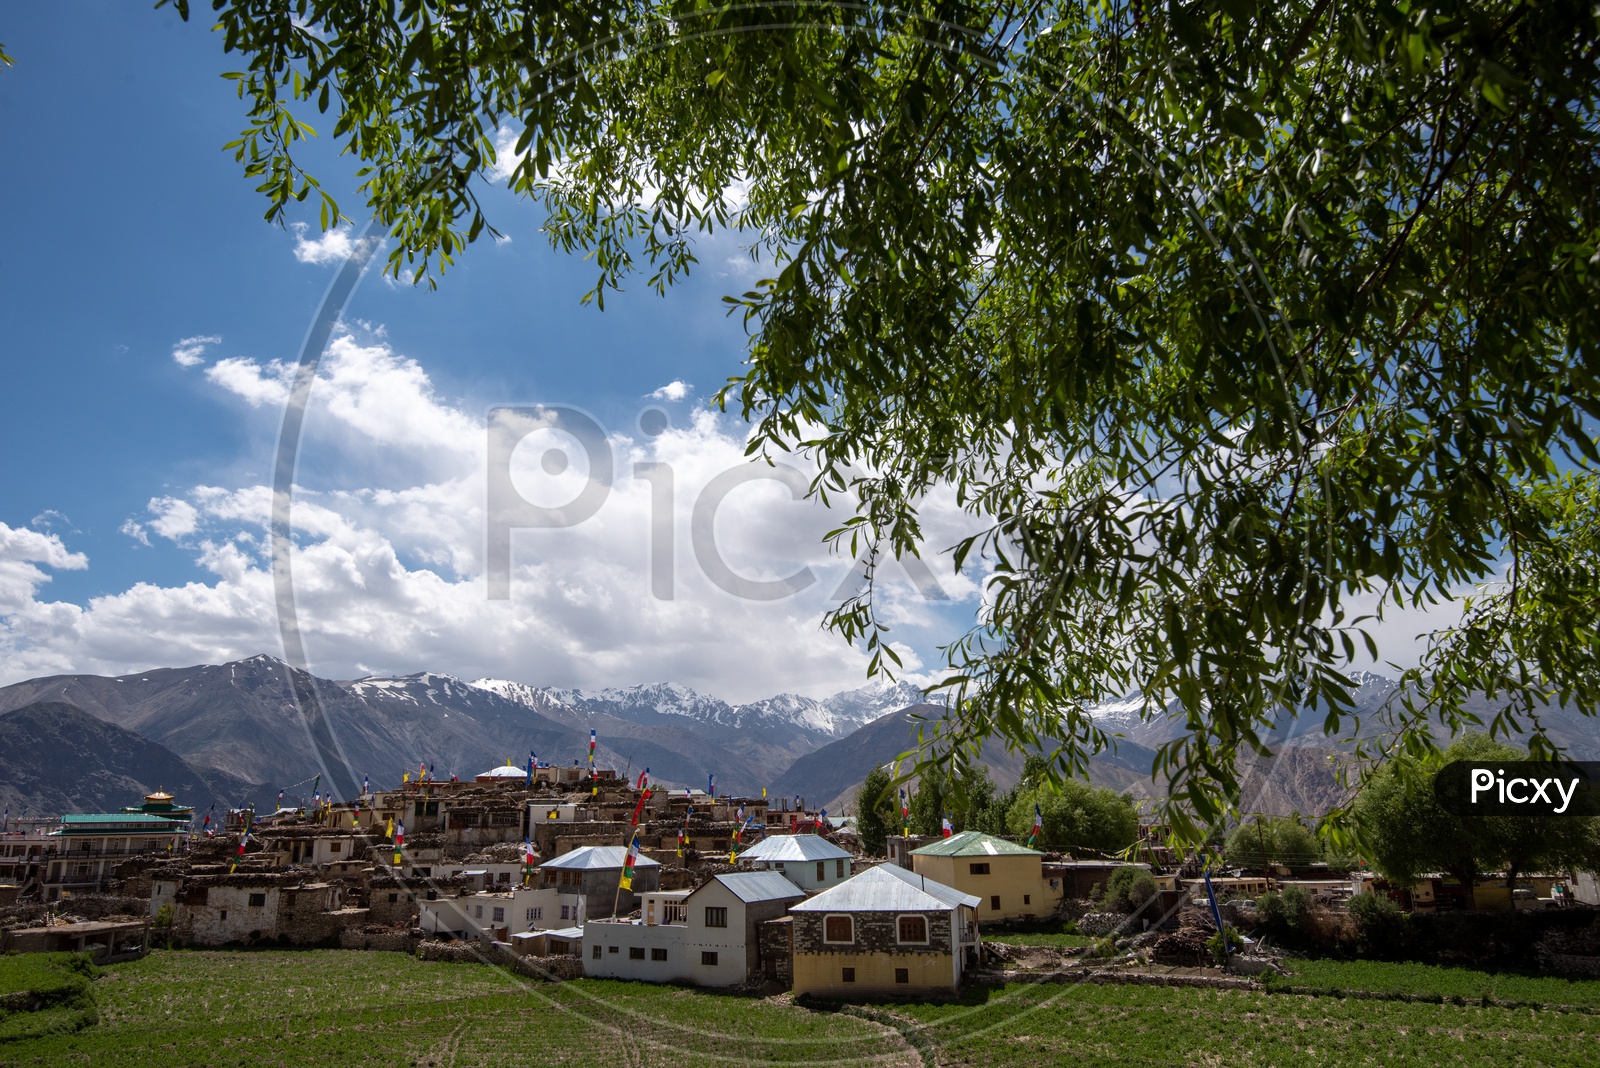 Snow Capped mountains of Spiti Valley with houses